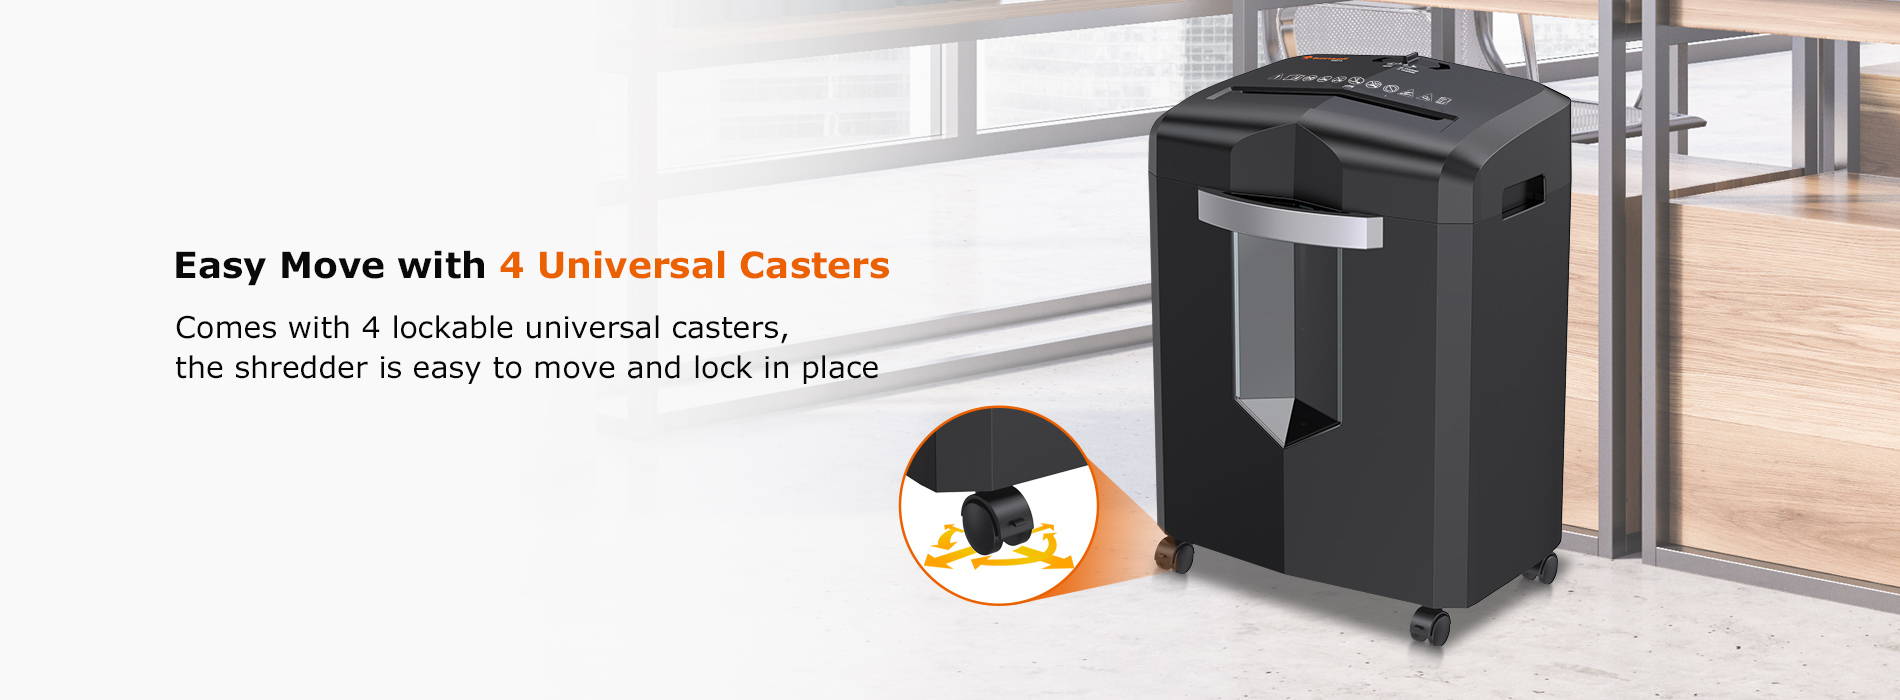 Easy Move with 4 Universal Casters  Comes with 4 lockable universal casters, the shredder is easy to move and lock in place